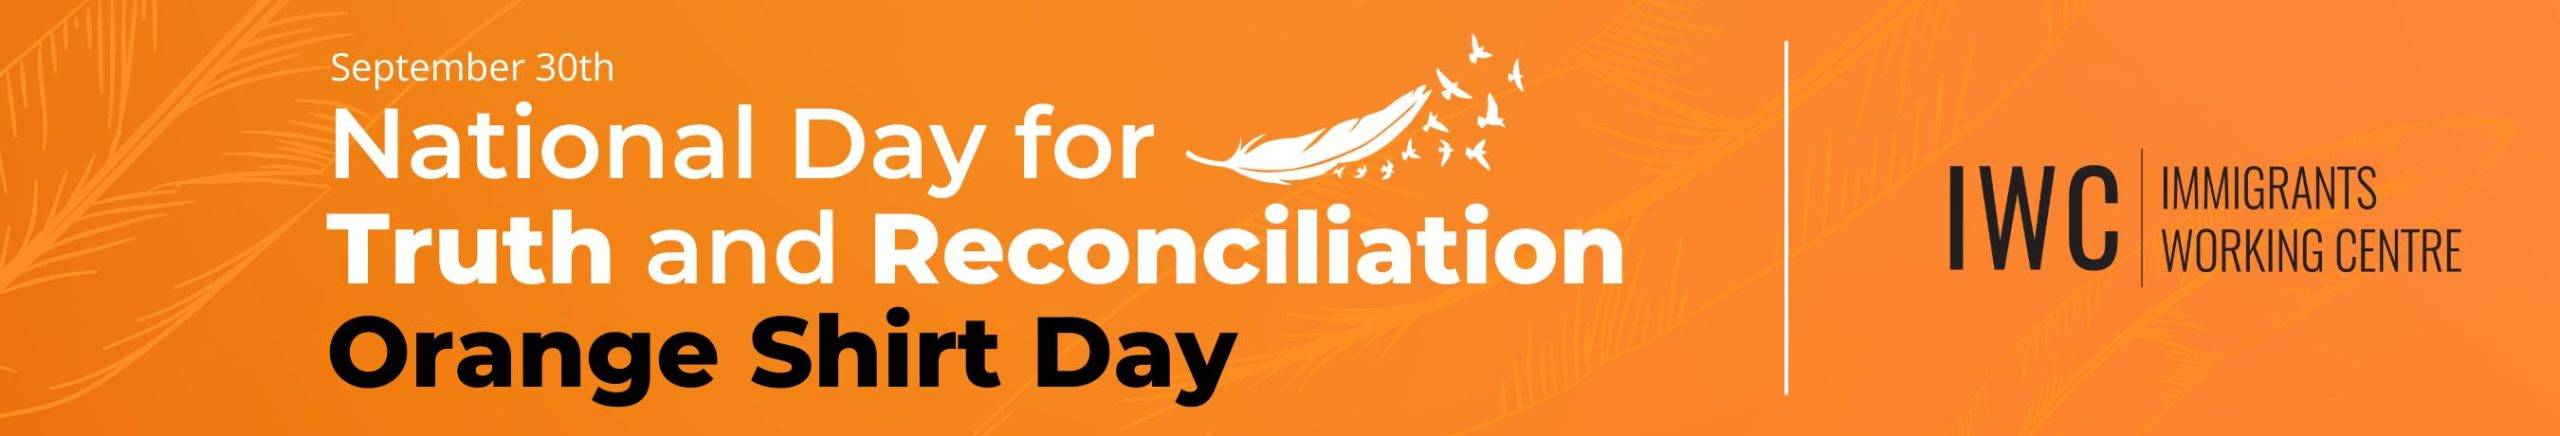 National Day for Truth and Reconciliation Header